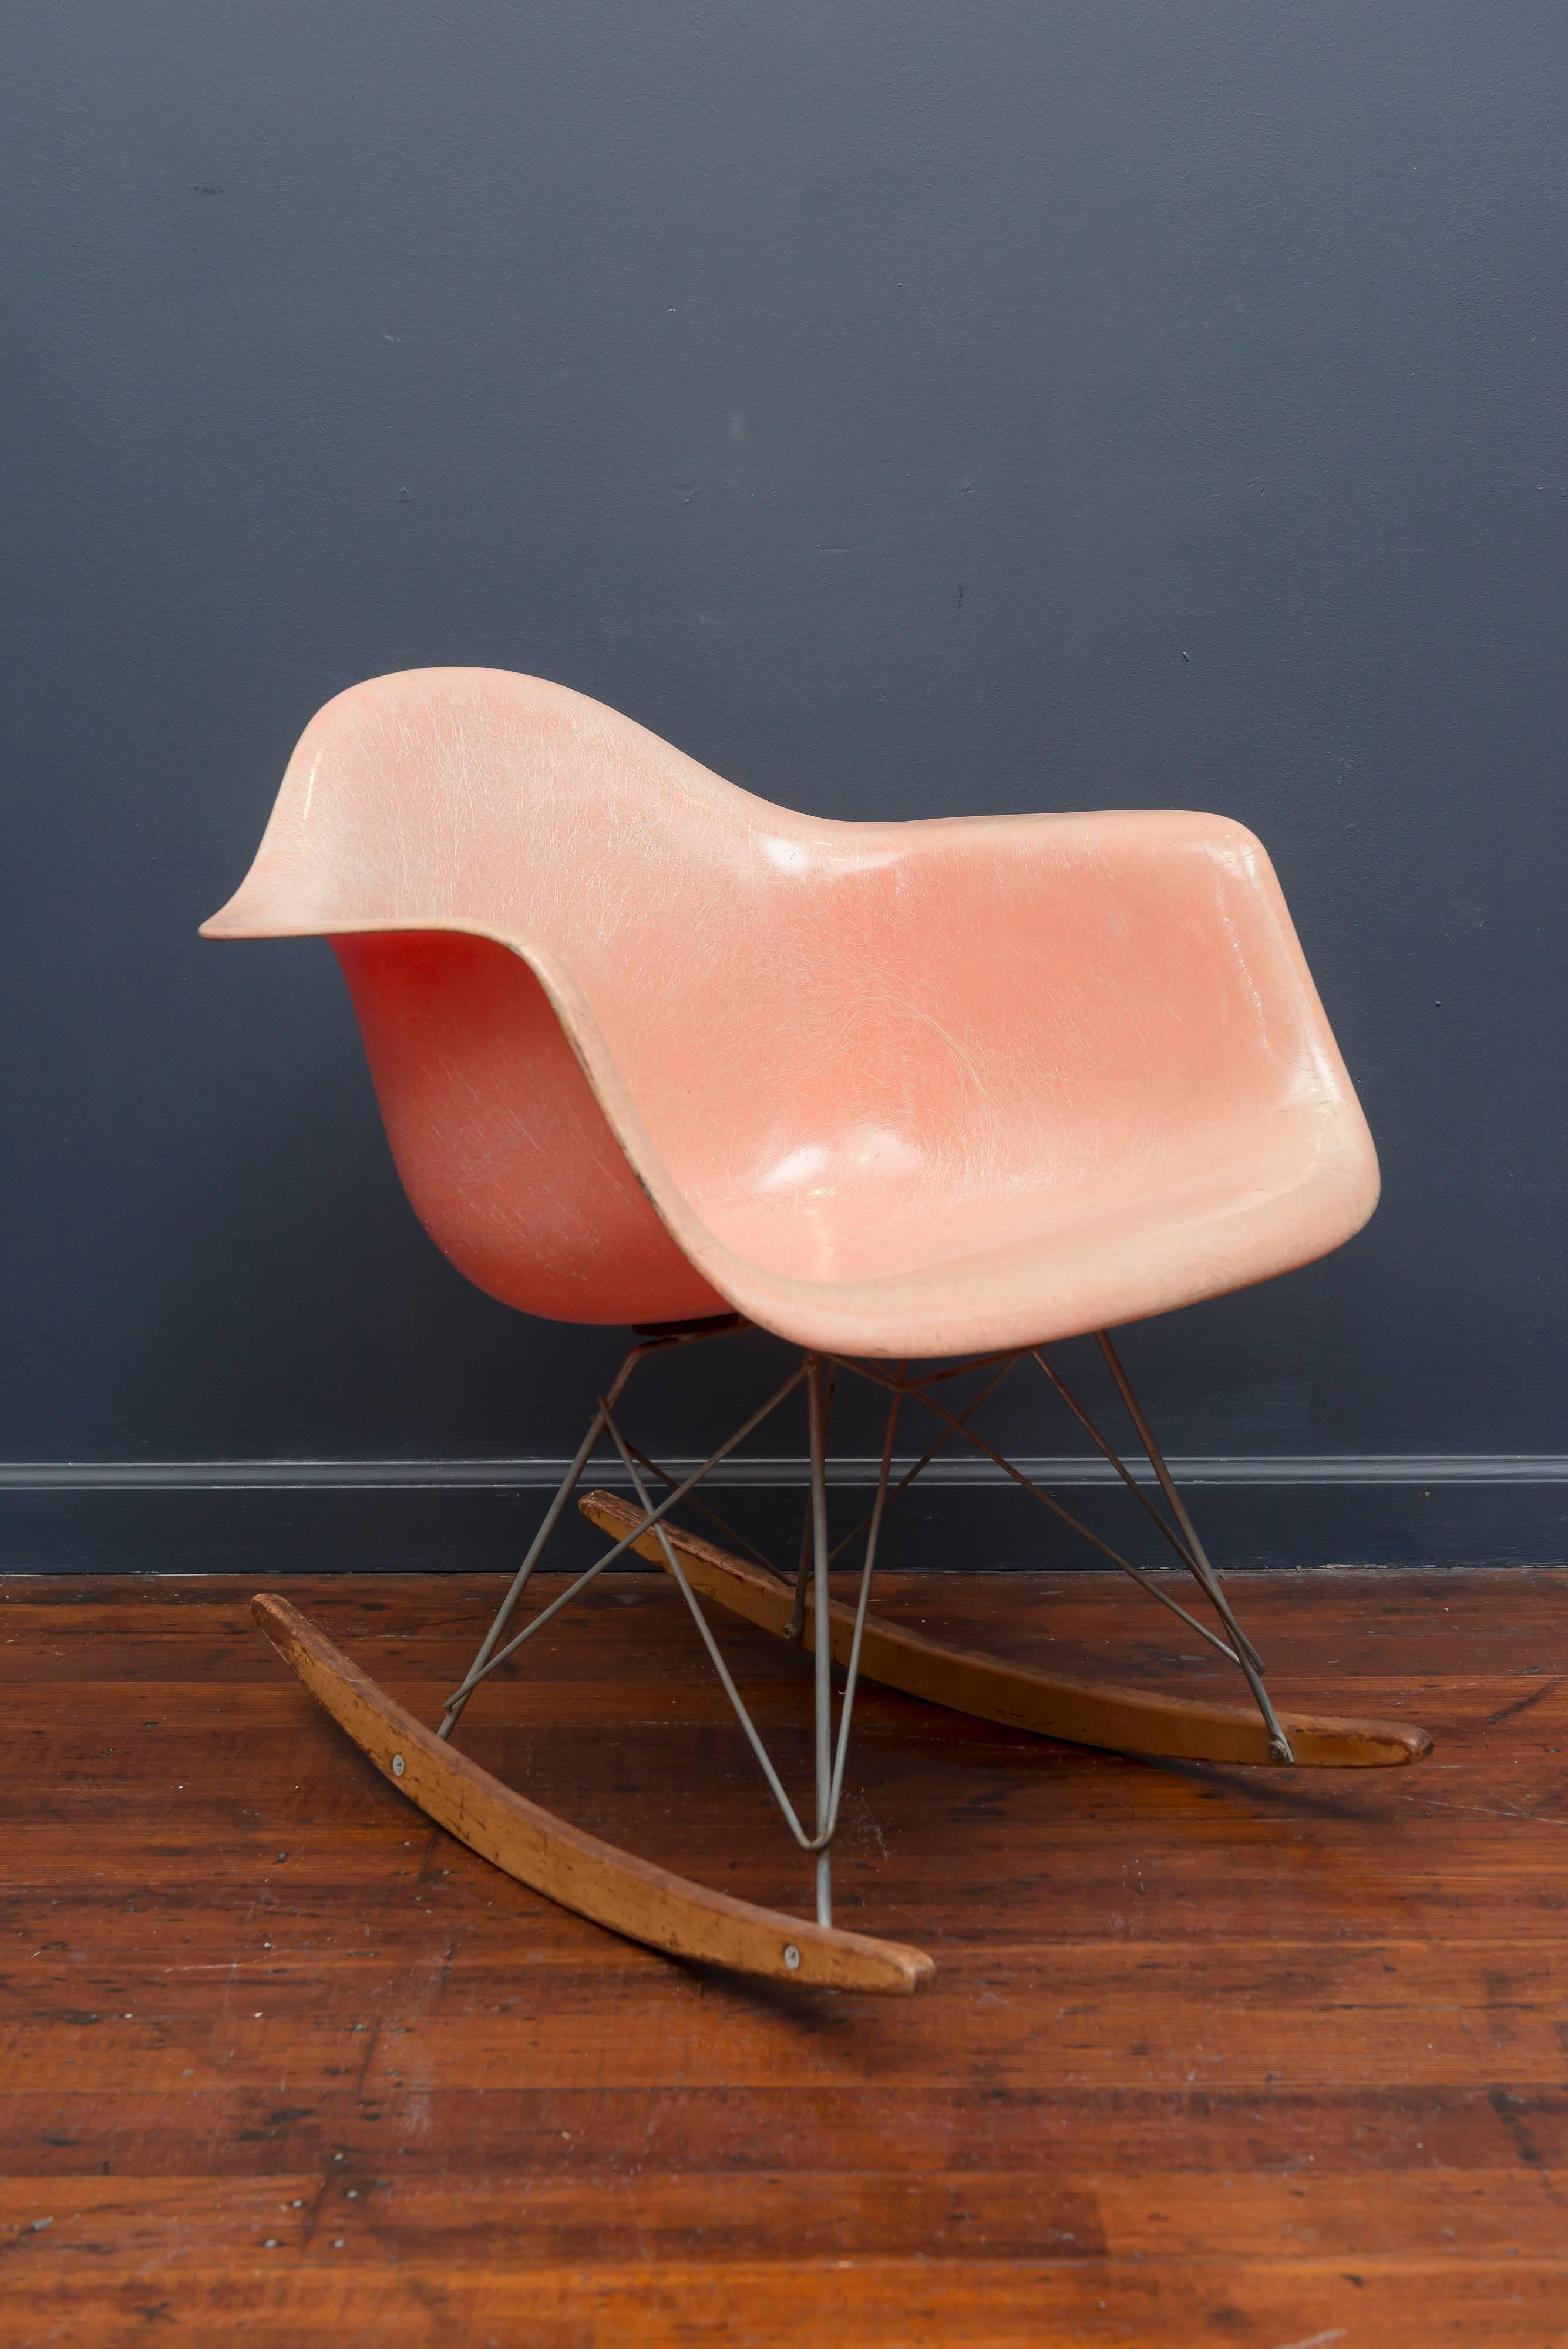 First edition pink/salmon fiberglass RAR rocker designed by Charles Eames for Zenith products. Very good condition early production rope edge rocker completely original, label.